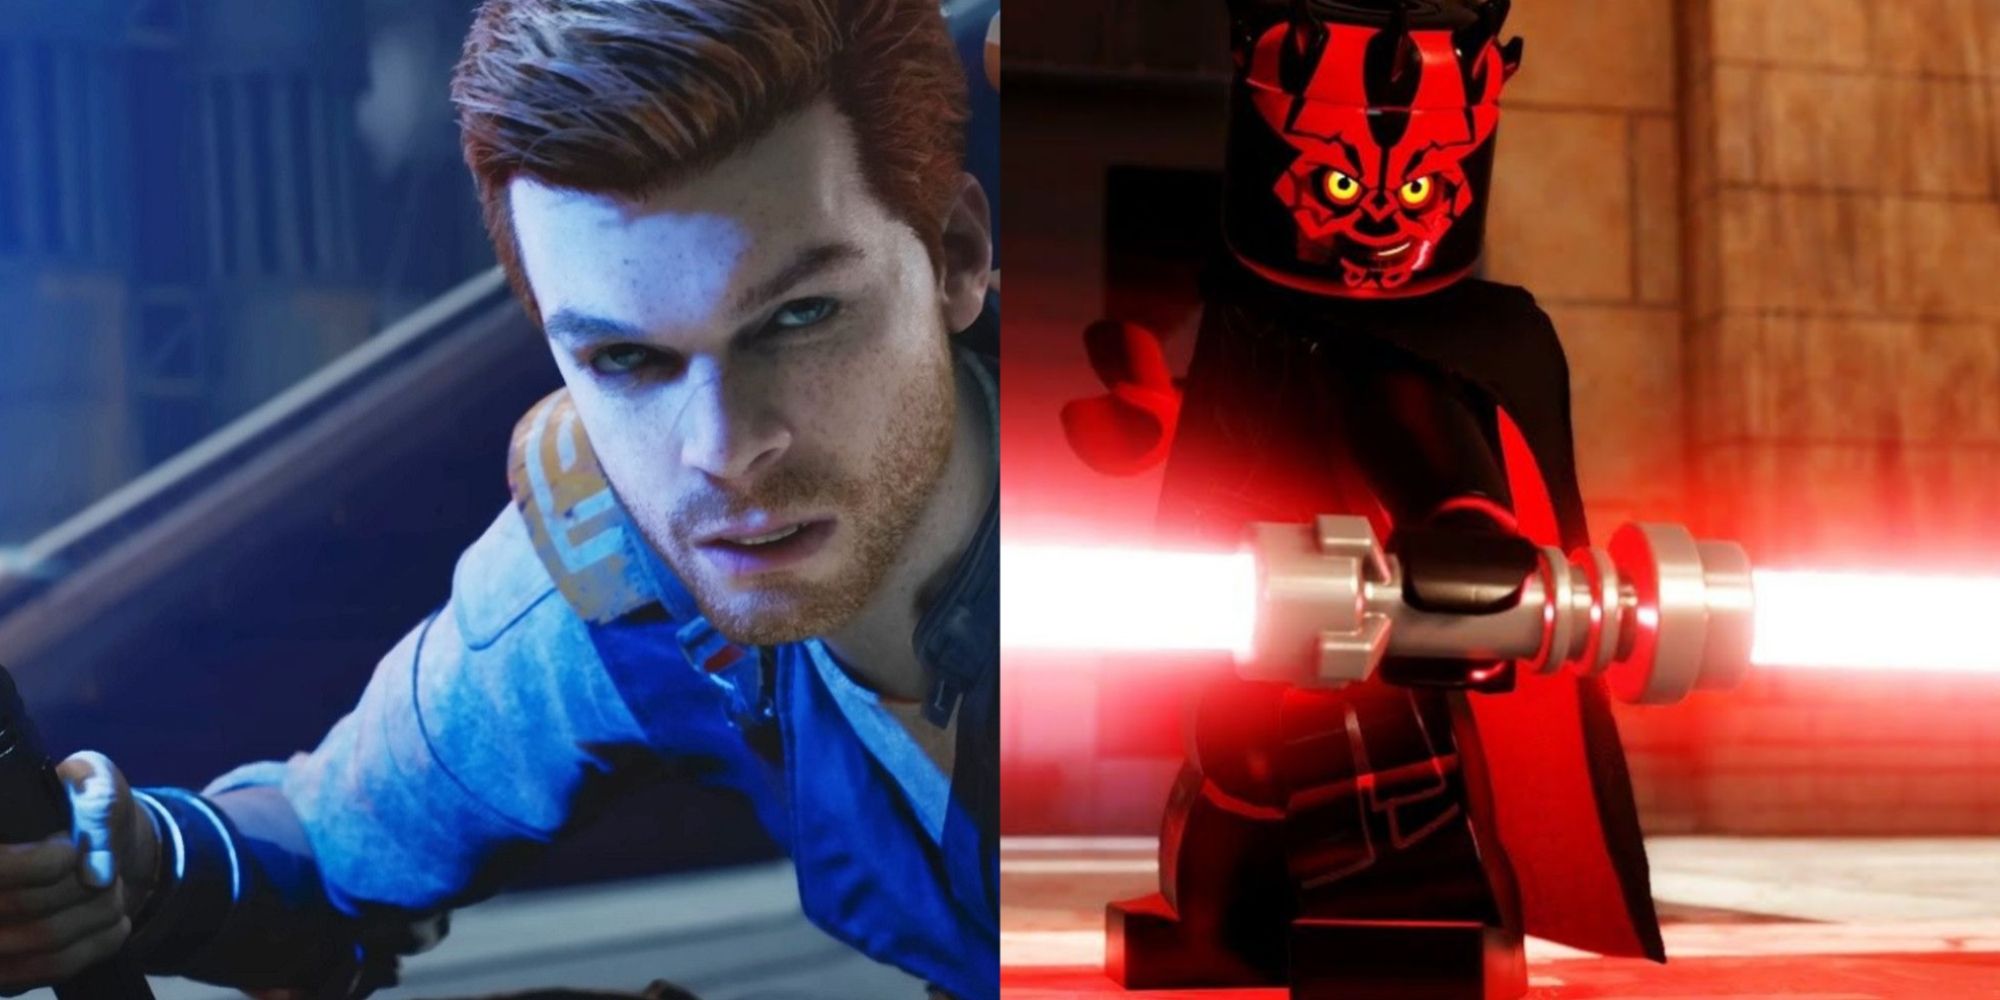 Star Wars Best Games Featured Split Image Cal And Darth Maul